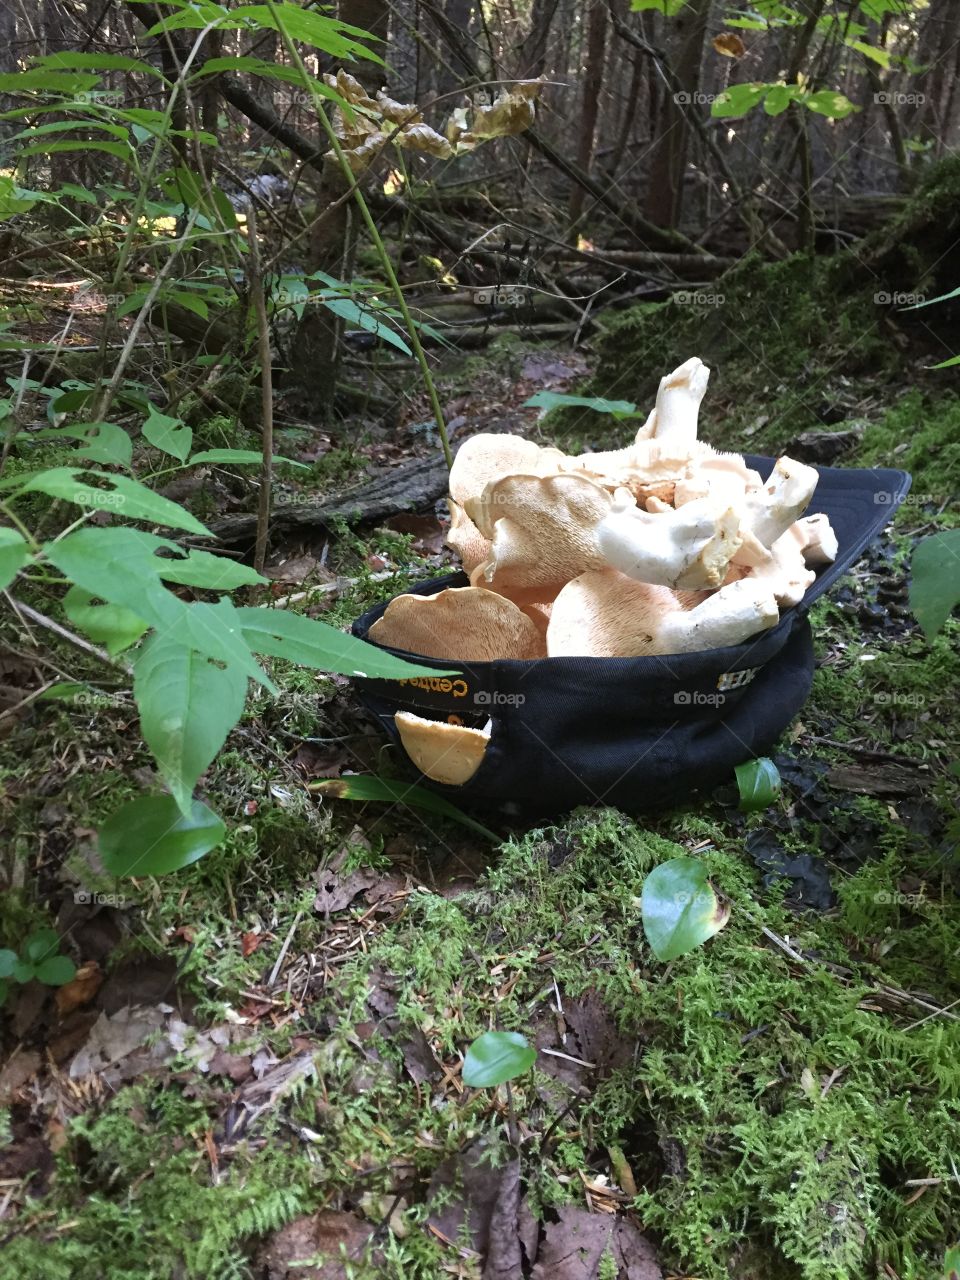 In a forest, mushrooms picking in a baseball cap